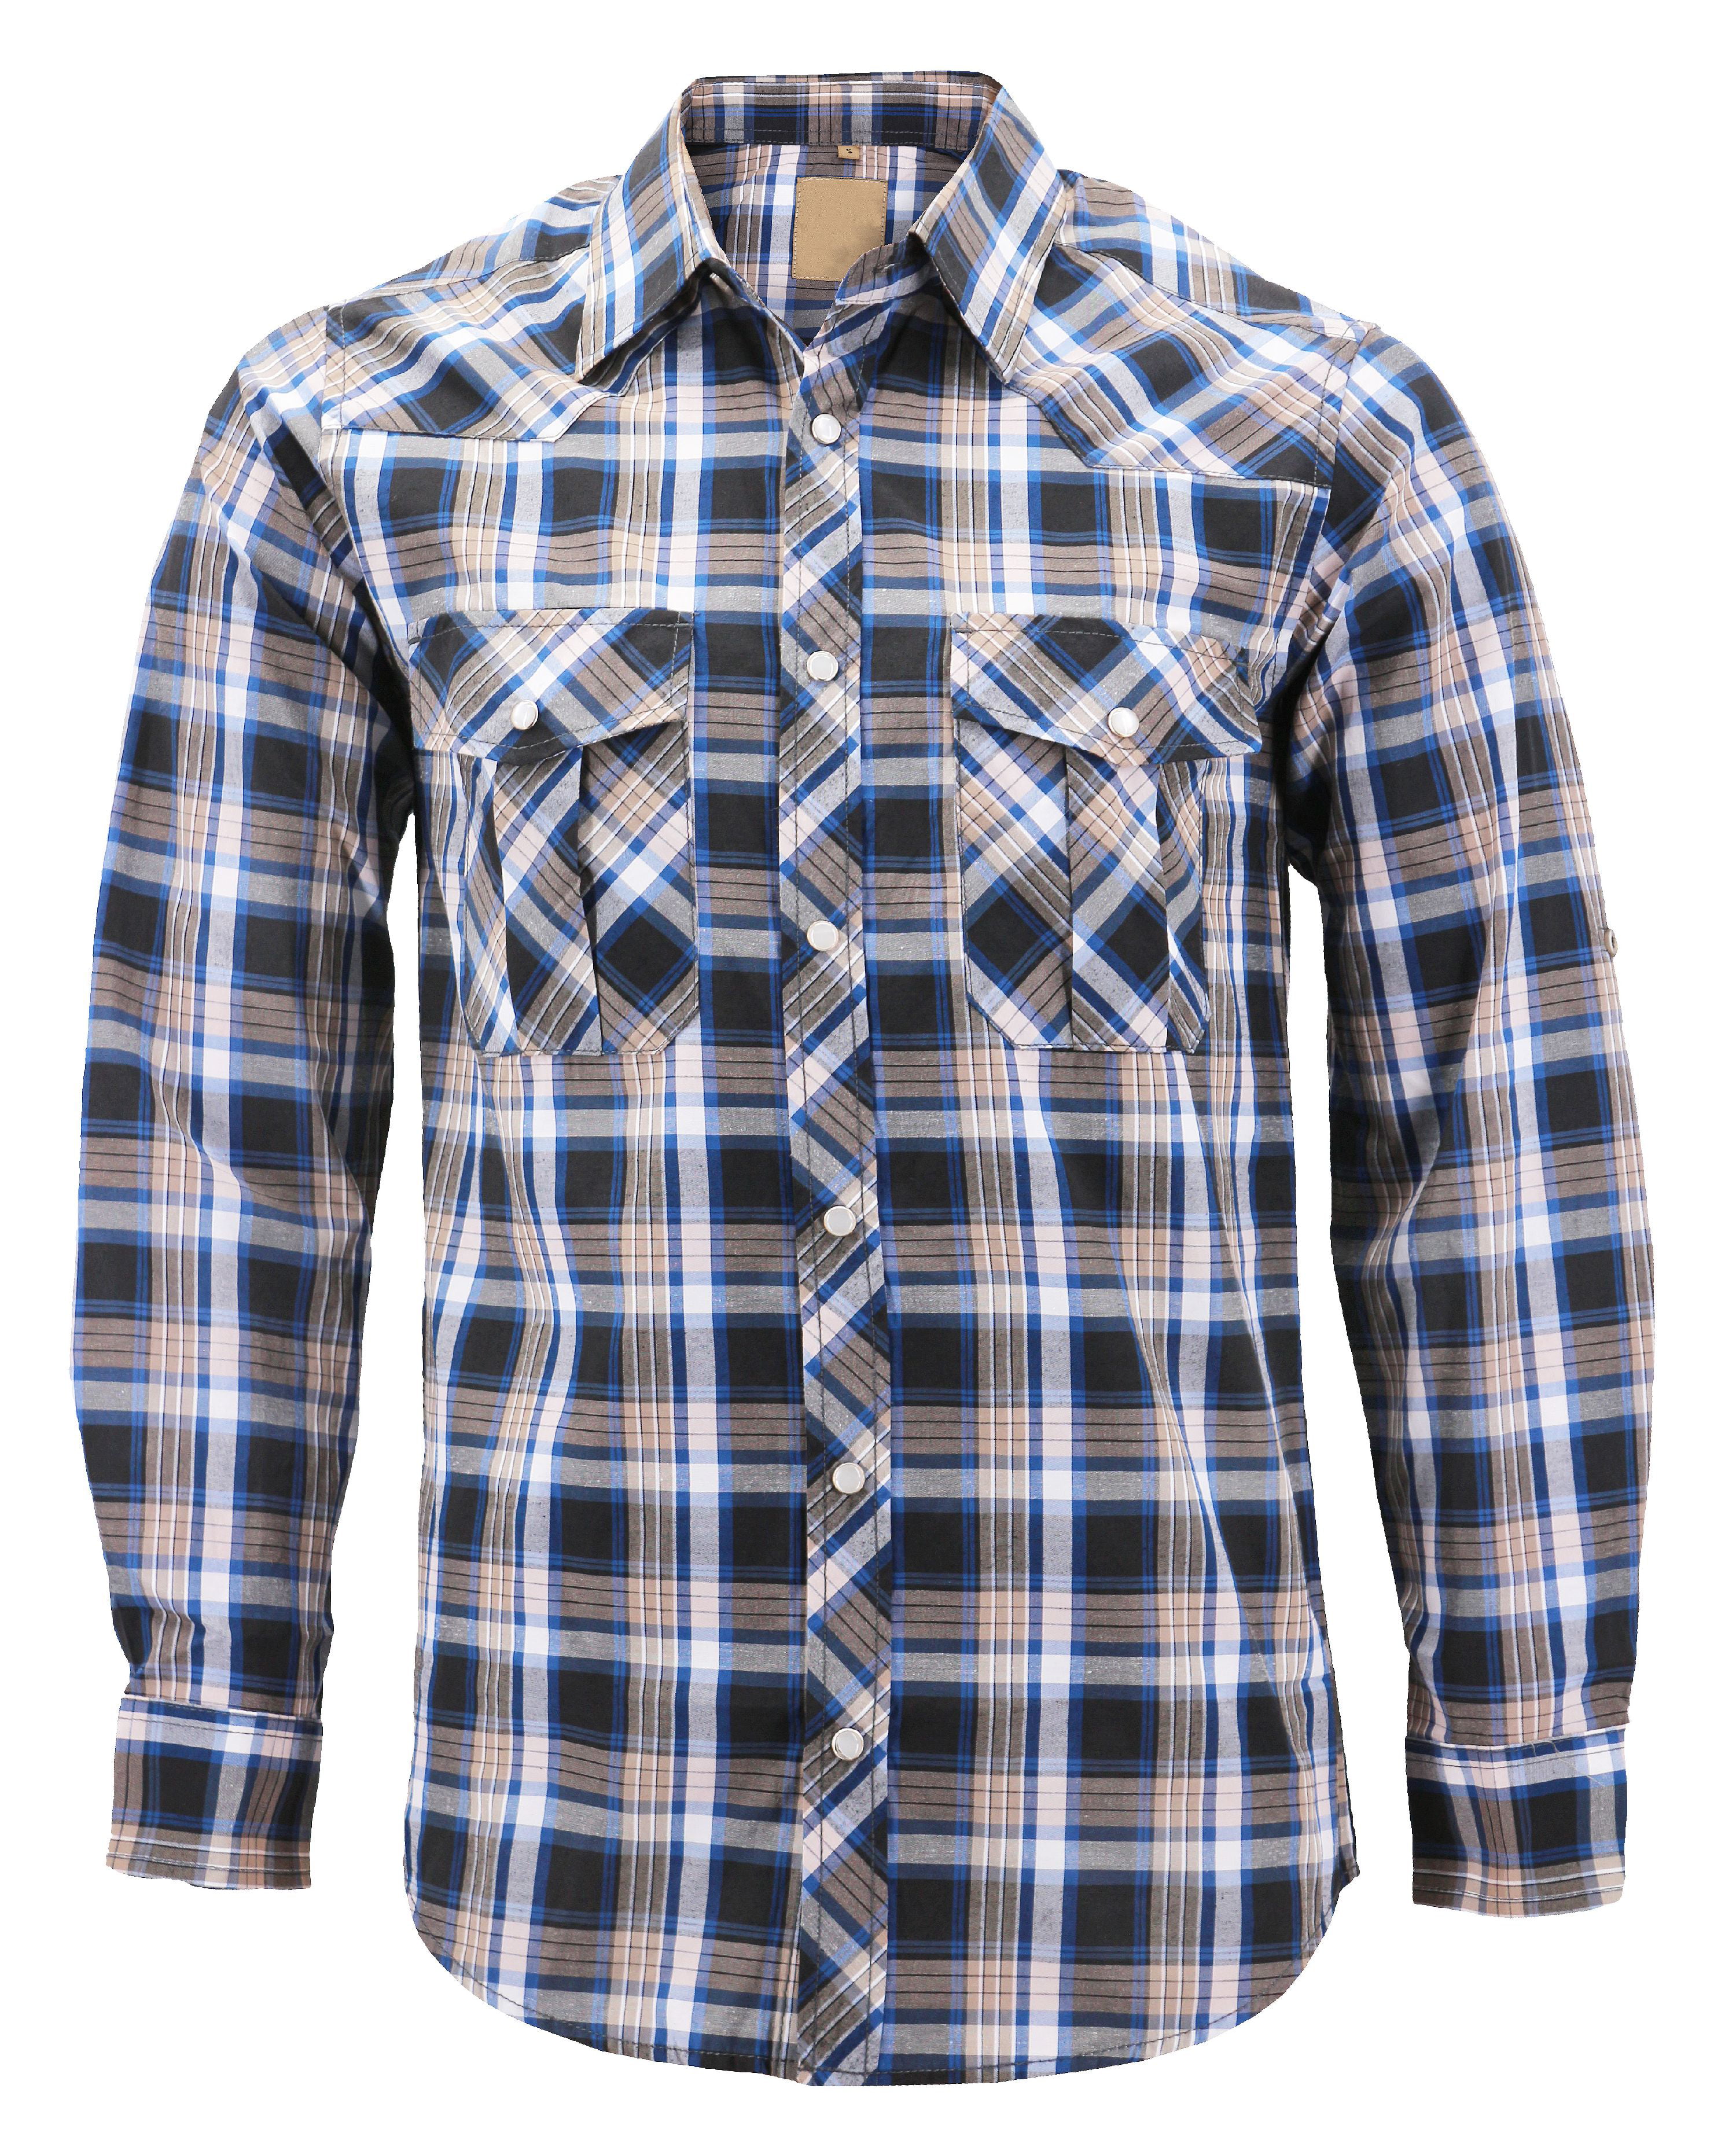 VKWEAR - Men’s Western Pearl Snap Button Down Casual Long Sleeve Plaid